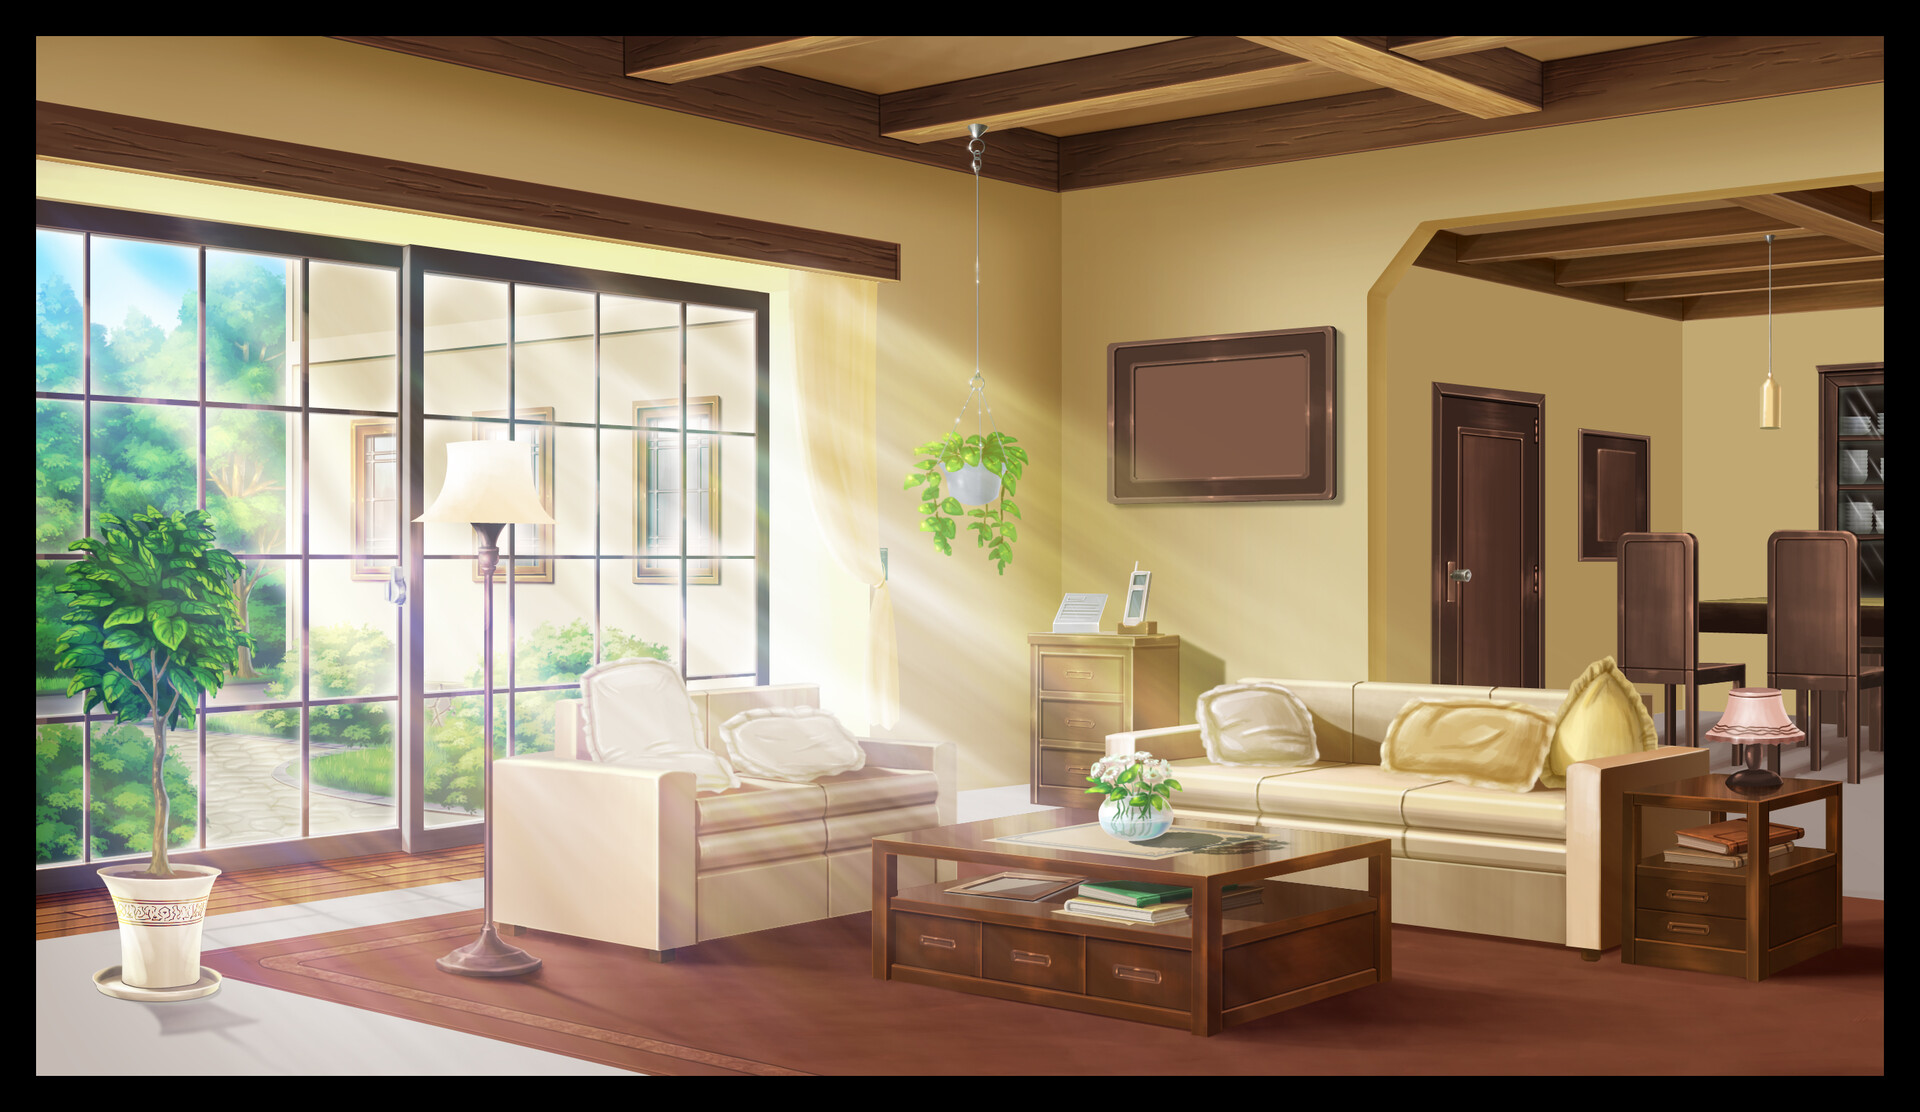 Details 200 anime house background - Abzlocal.mx